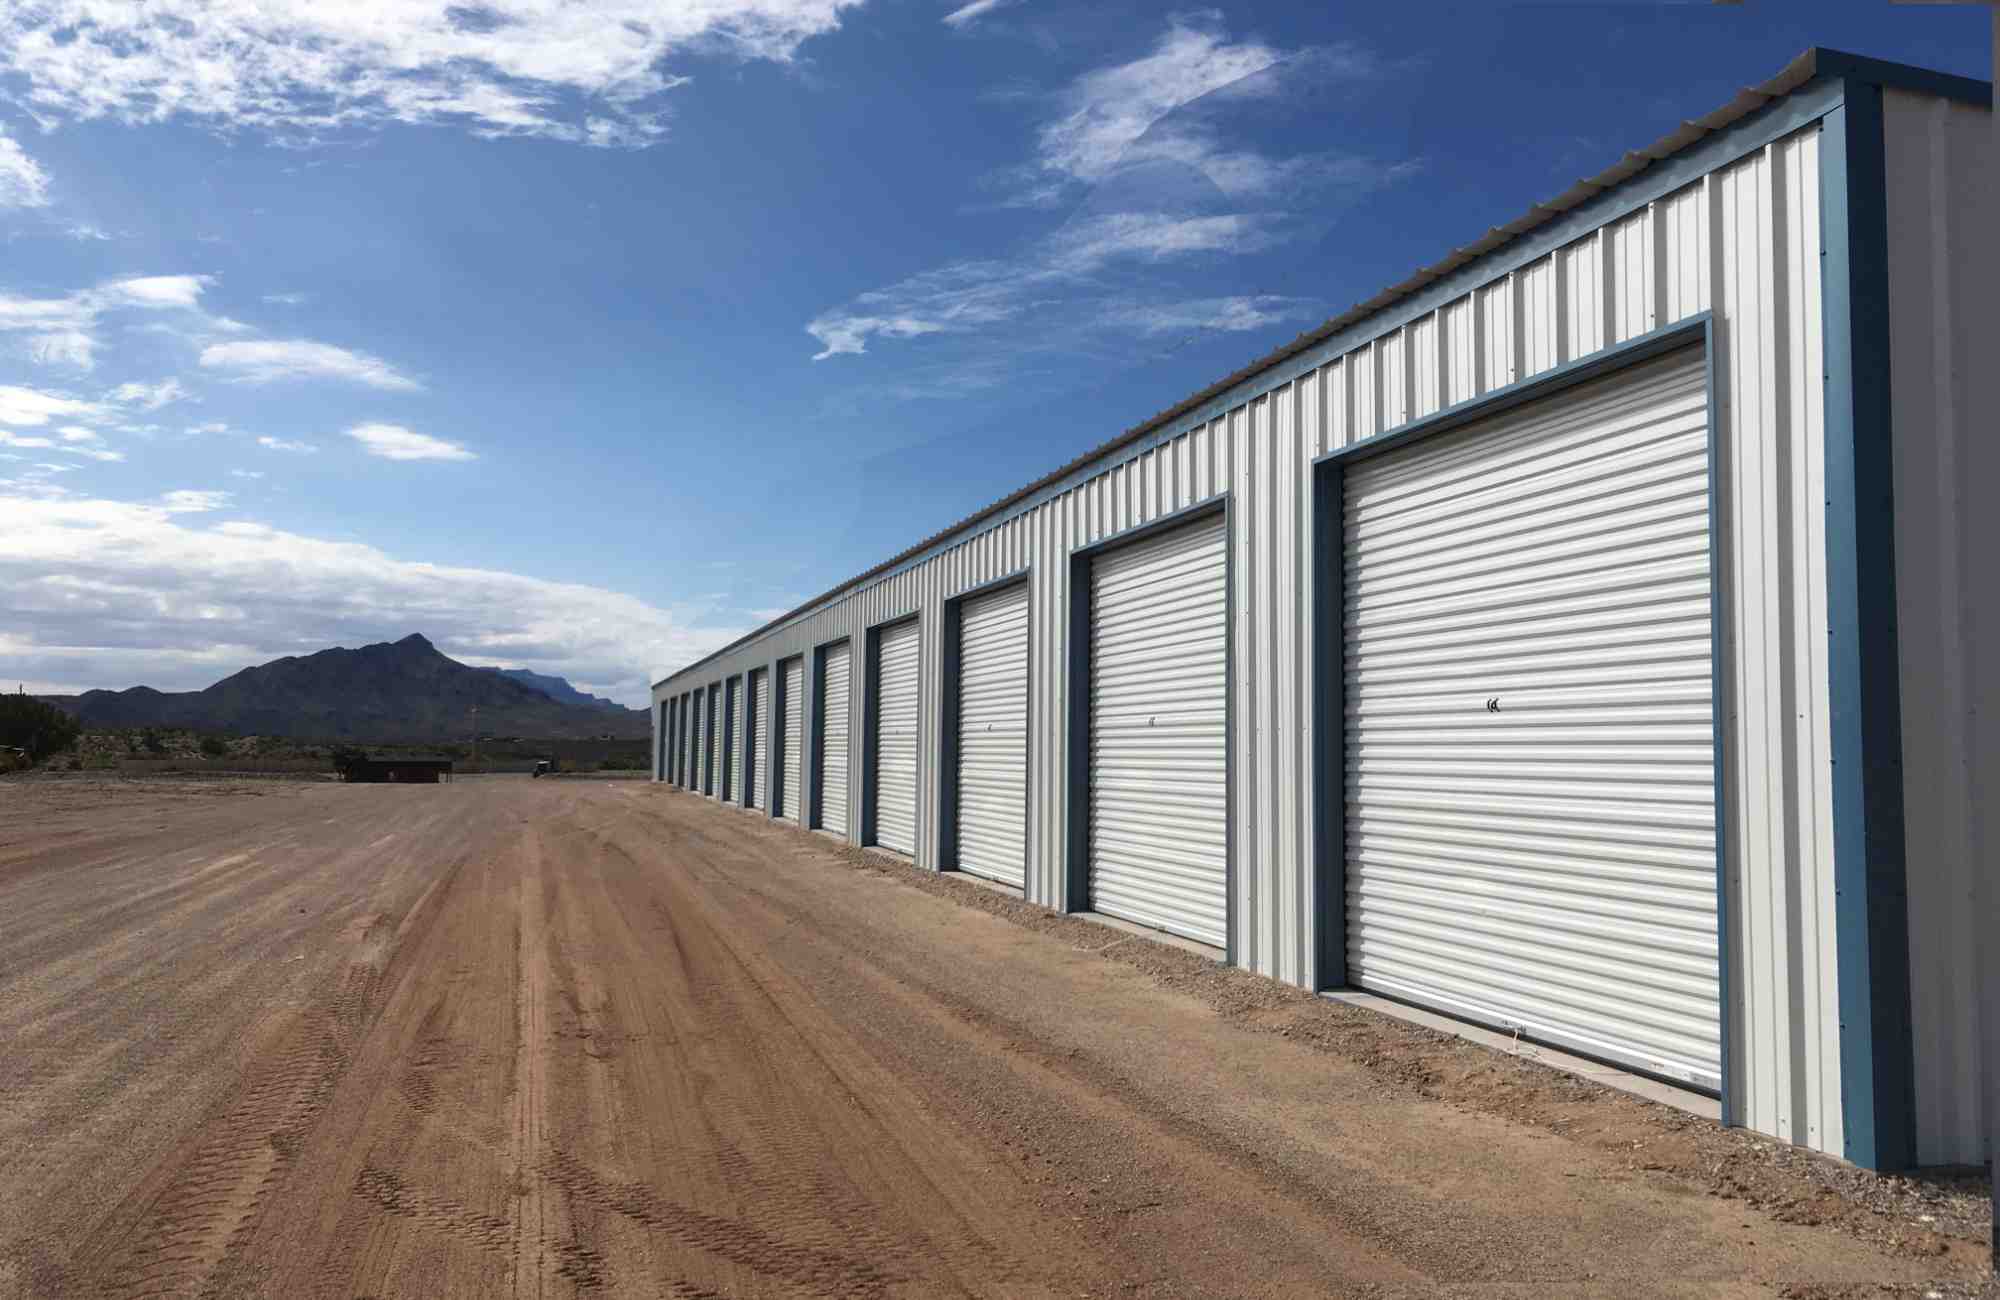 Desert View - indoor storage units in Elephant Butte New Mexico